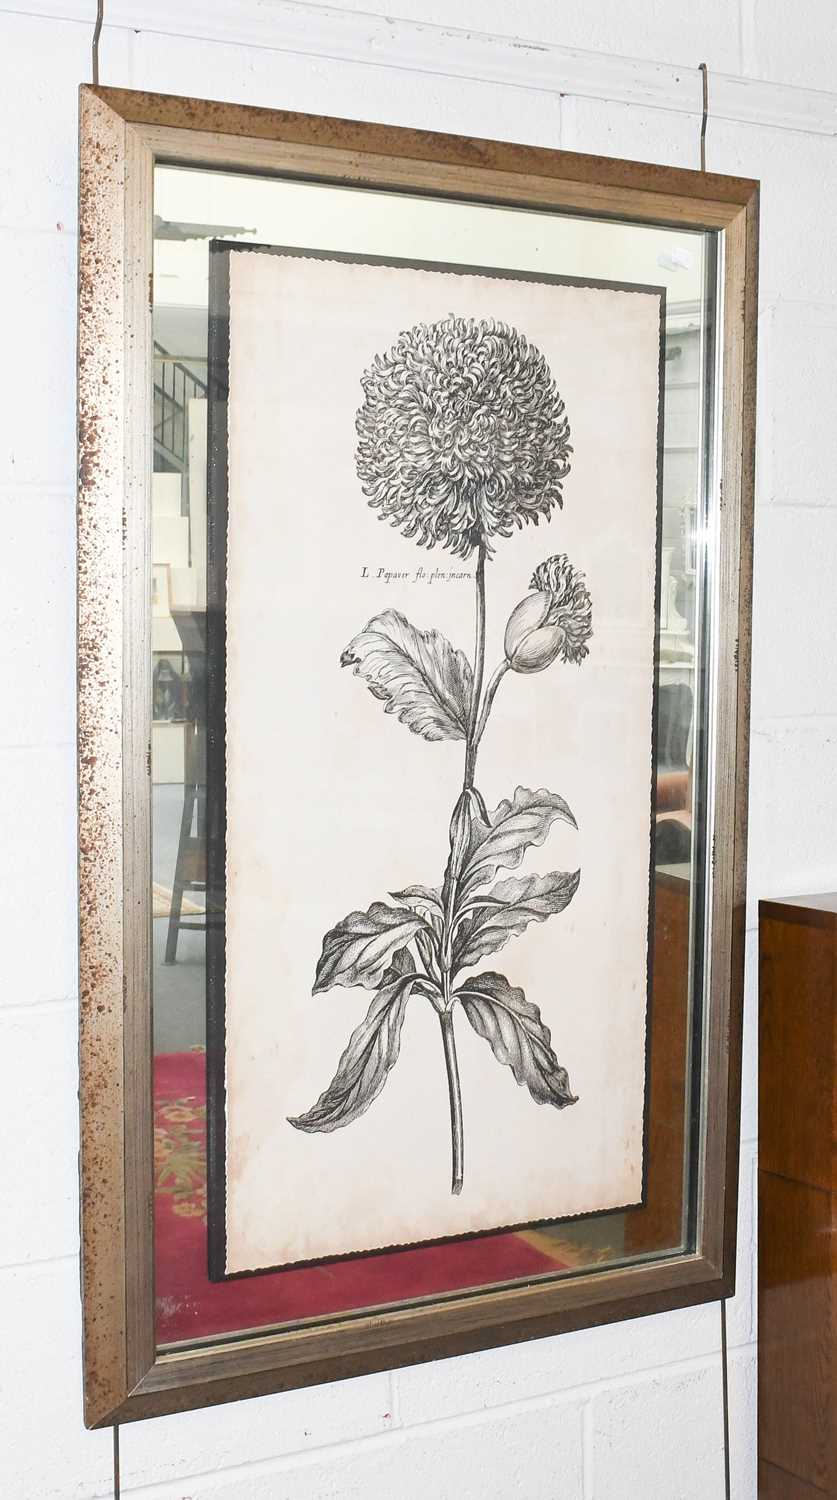 Set of Four Decorative John-Richard Botanical Prints in Mirrored Frames, 91cm by 45.5cm (4) - Image 4 of 5